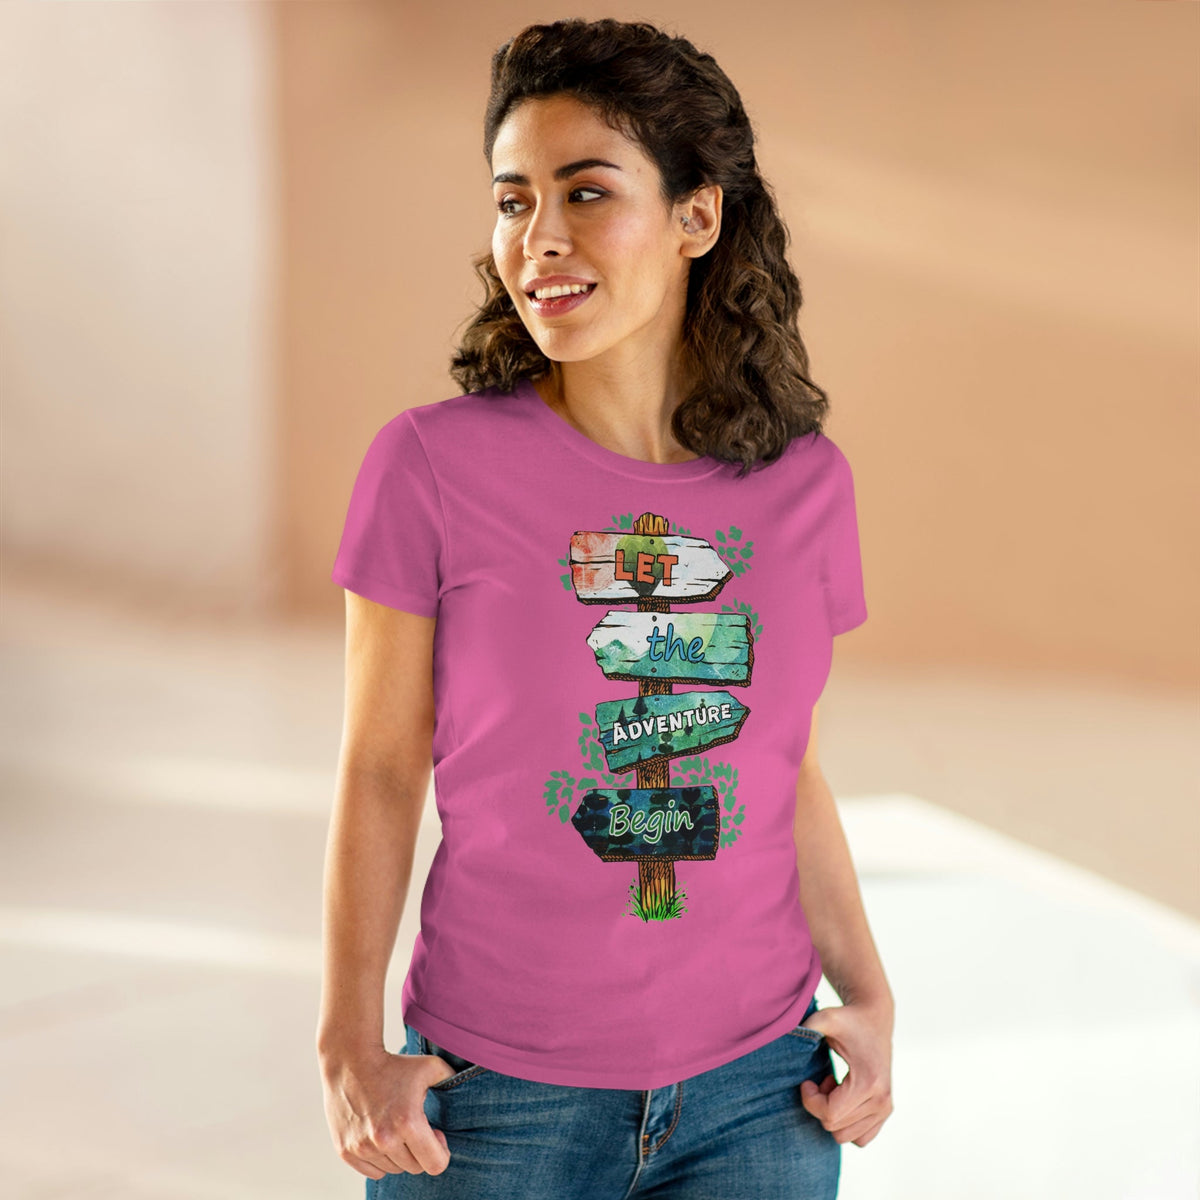 Let The Adventure Begin Women's Midweight Cotton Tee - Salty Medic Clothing Co.